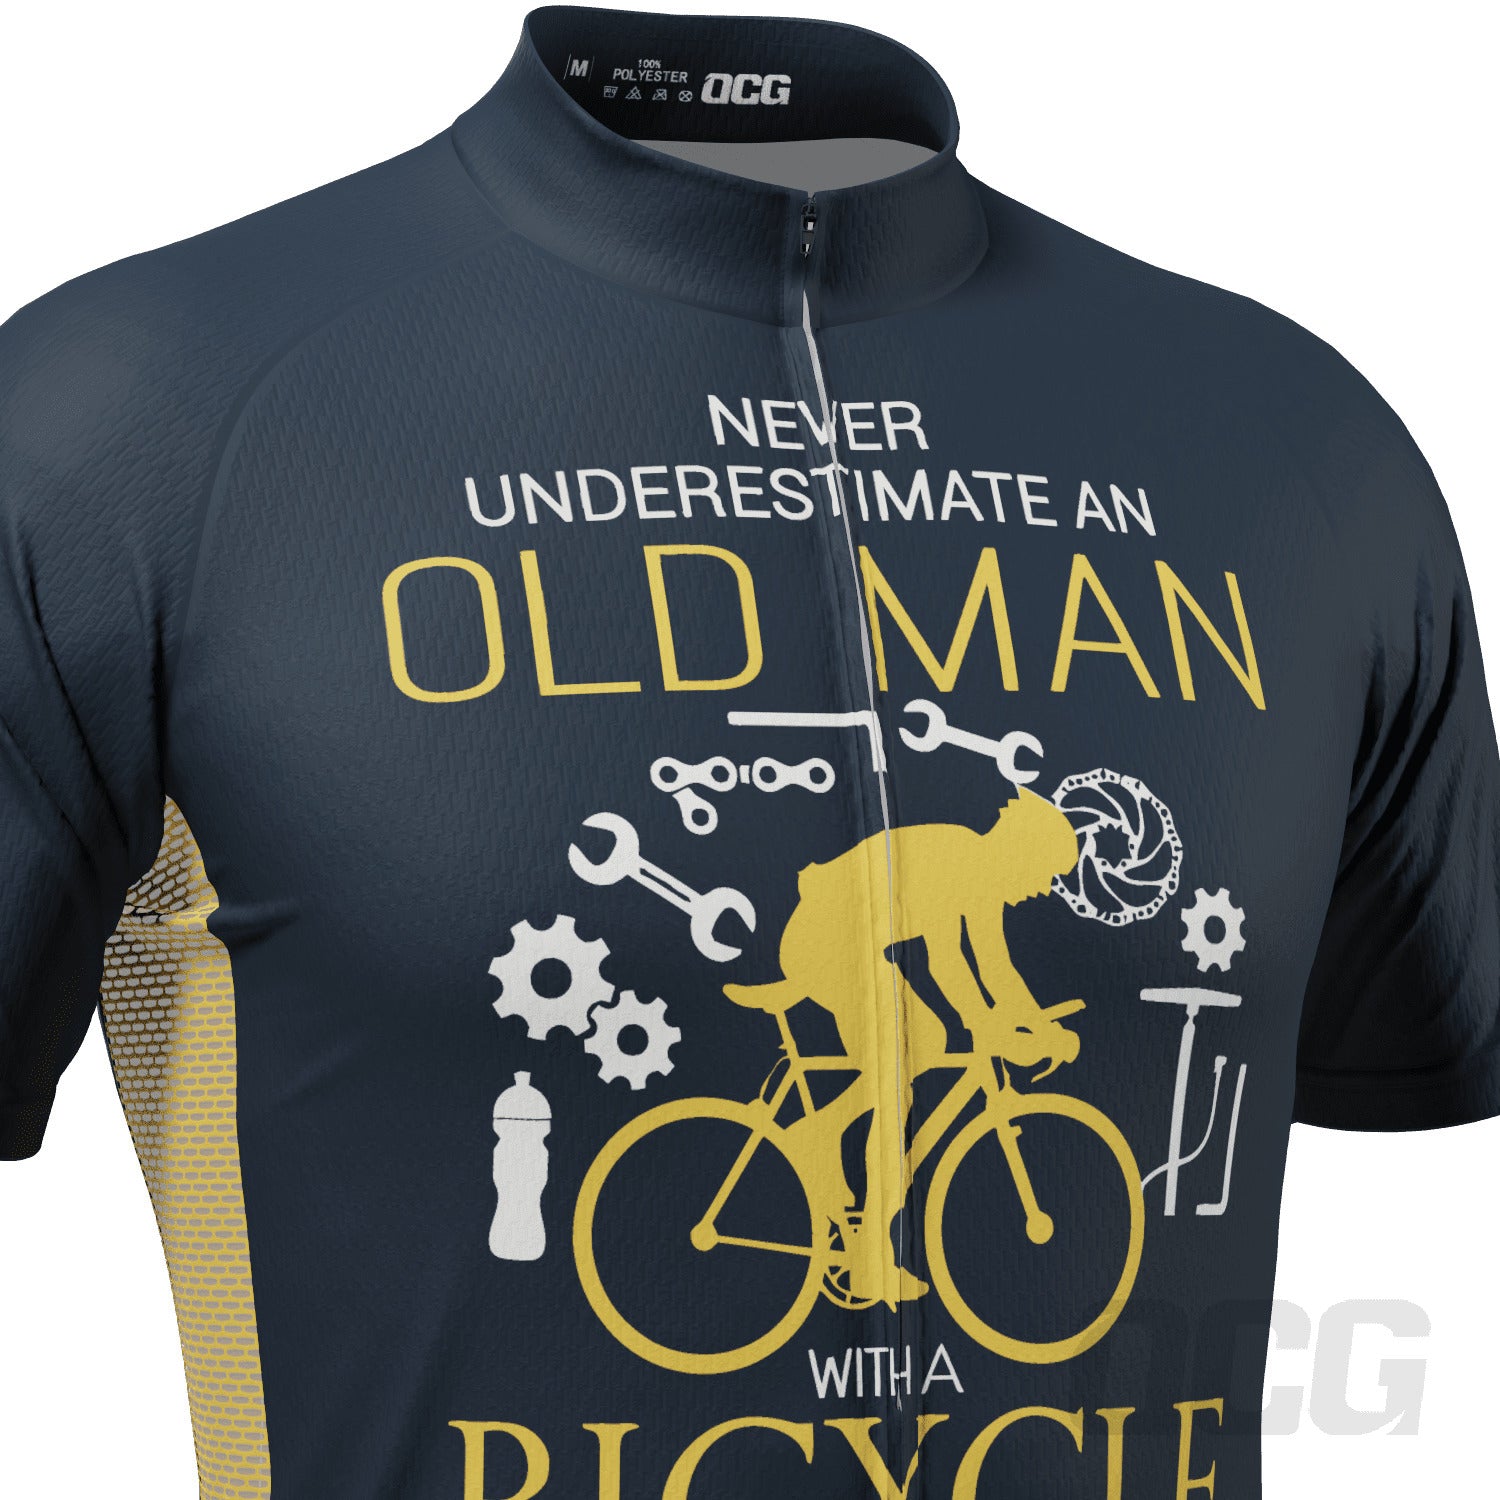 Men's Old Man Bicycle Short Sleeve Cycling Jersey